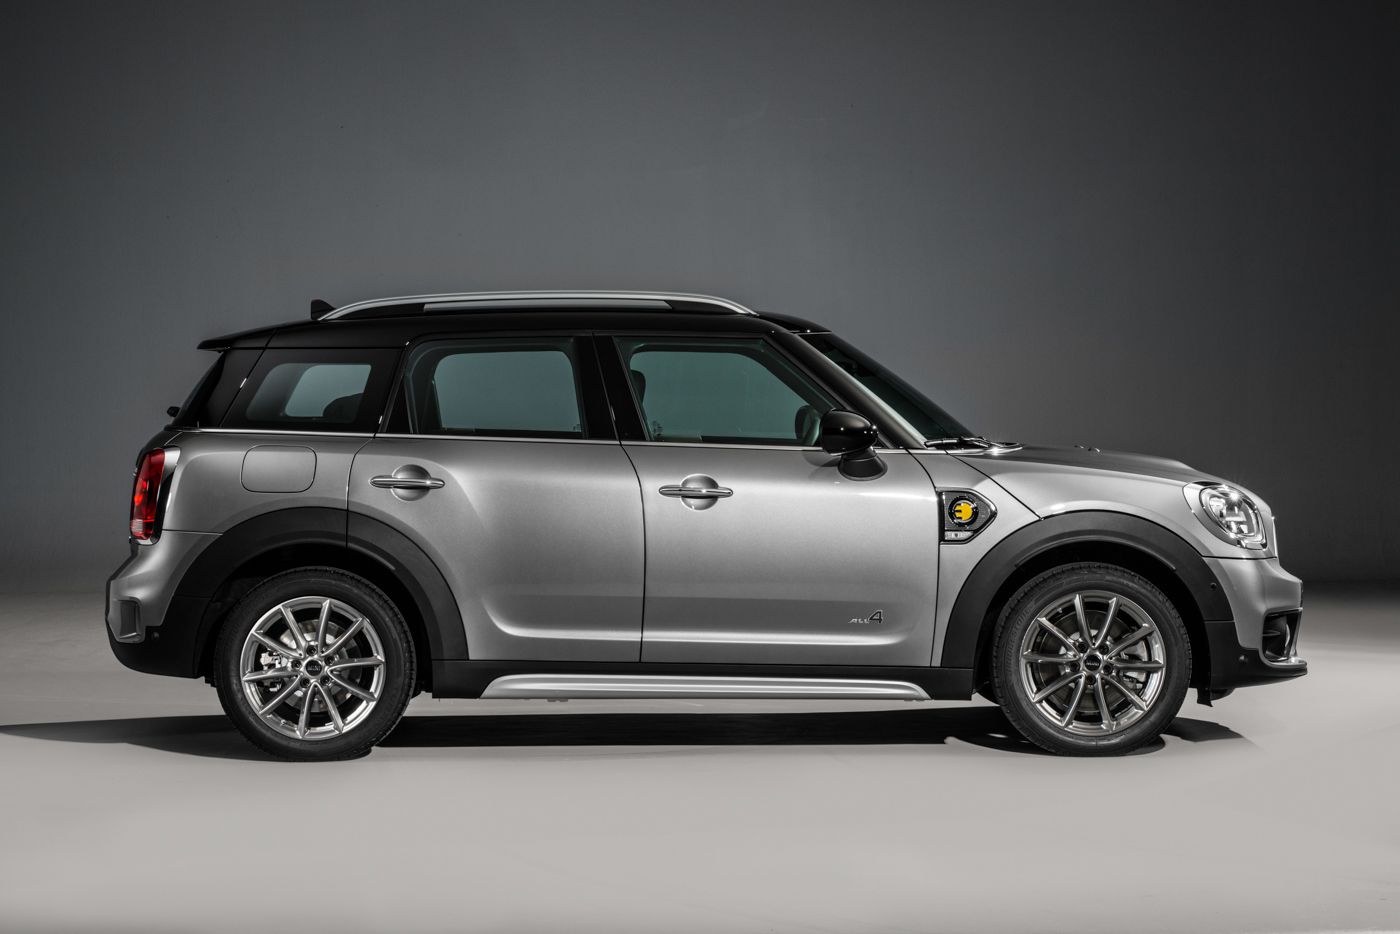 mini s first hybrid is an awd countryman with an electric mode image 1